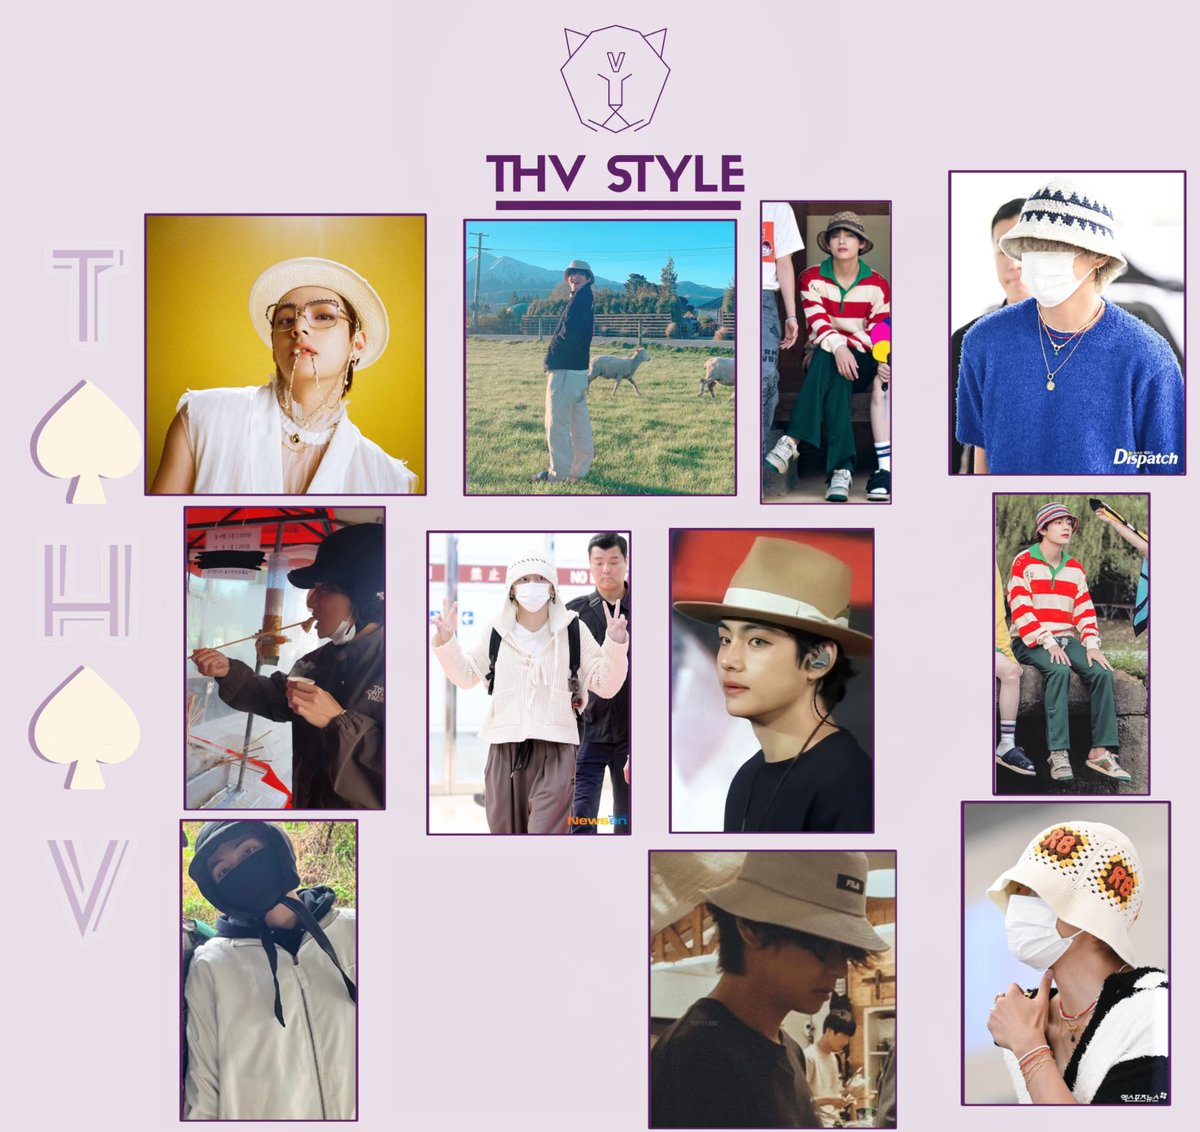 Kim Taehyung’s Hats and buckets Collection 💜💜

@BTS_TWT
 #ThvStyle #TaehyungStyle #BTSV #TaehyungxCeline 
#뷔 #V #BTSV #TAEHYUNGxCartier